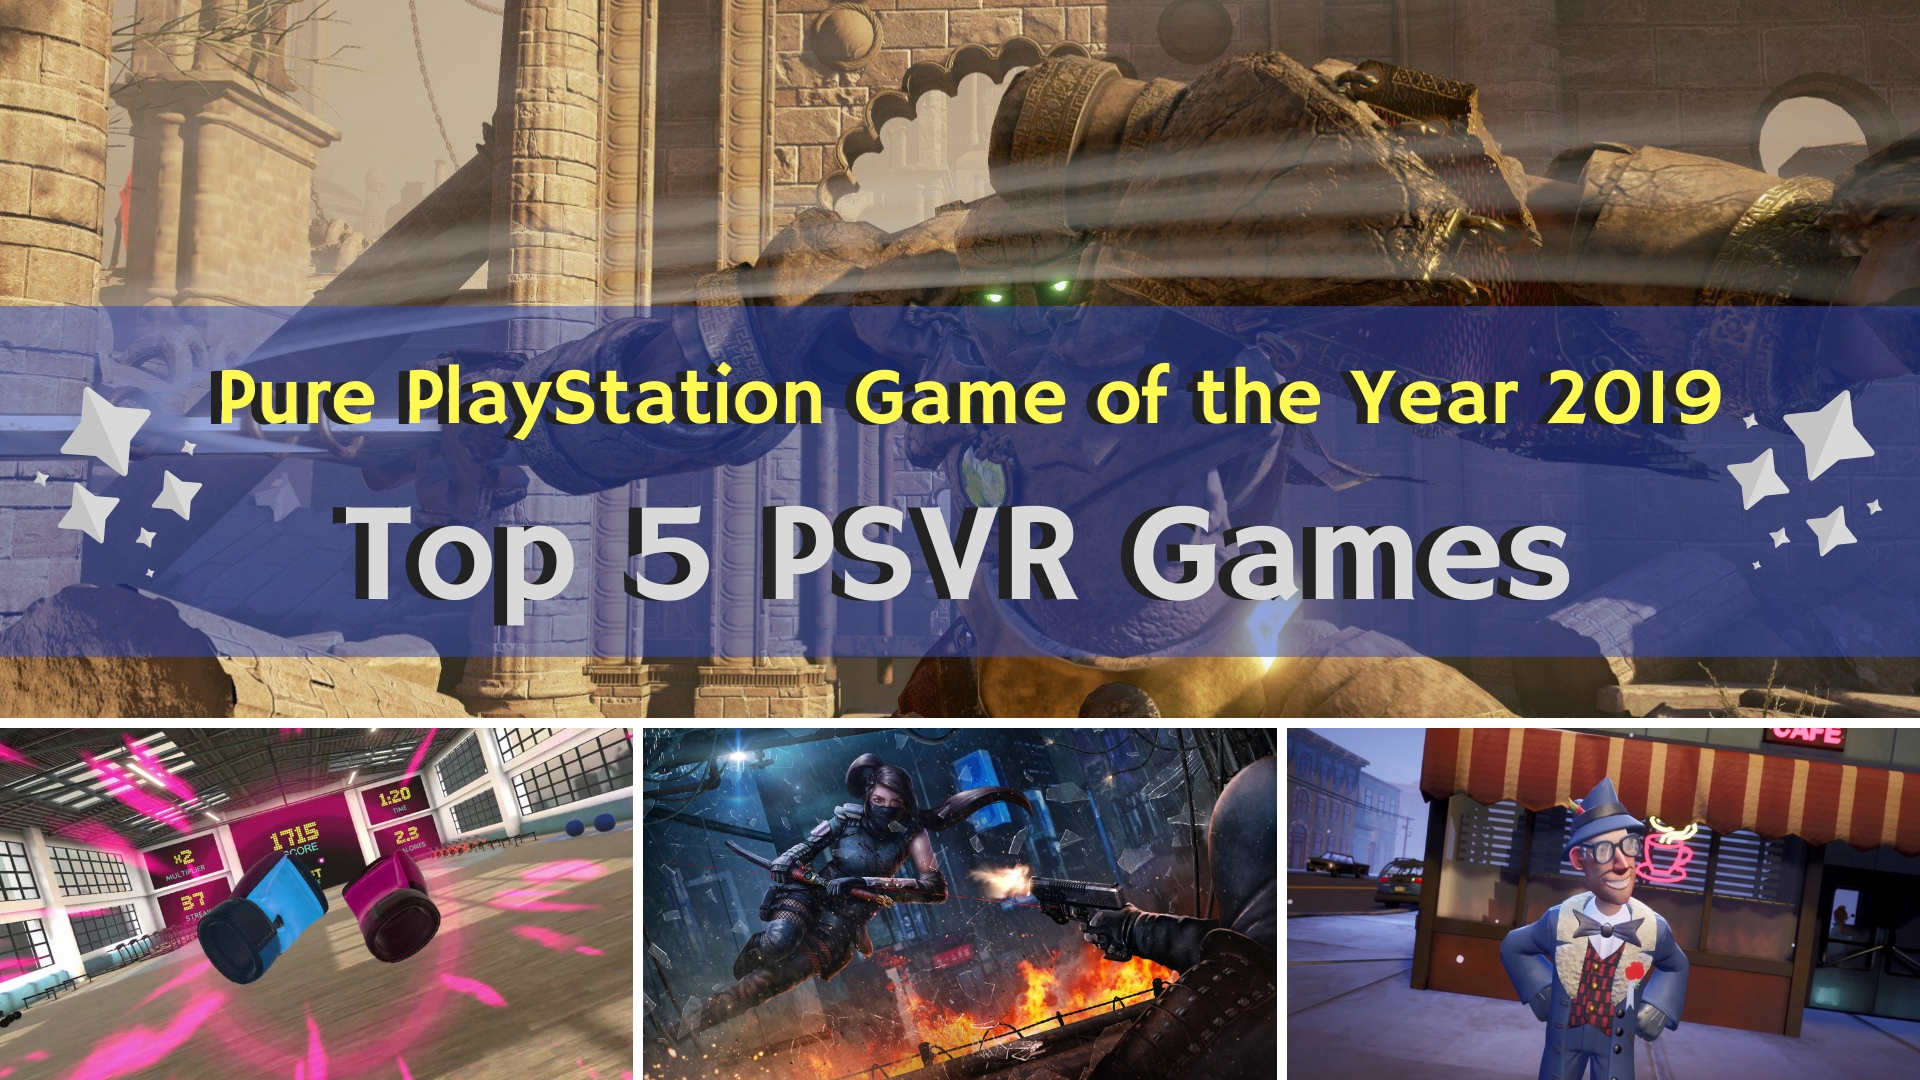 Feature: Game of the Year 2019 - Pure PlayStation's Top 5 PSVR Games